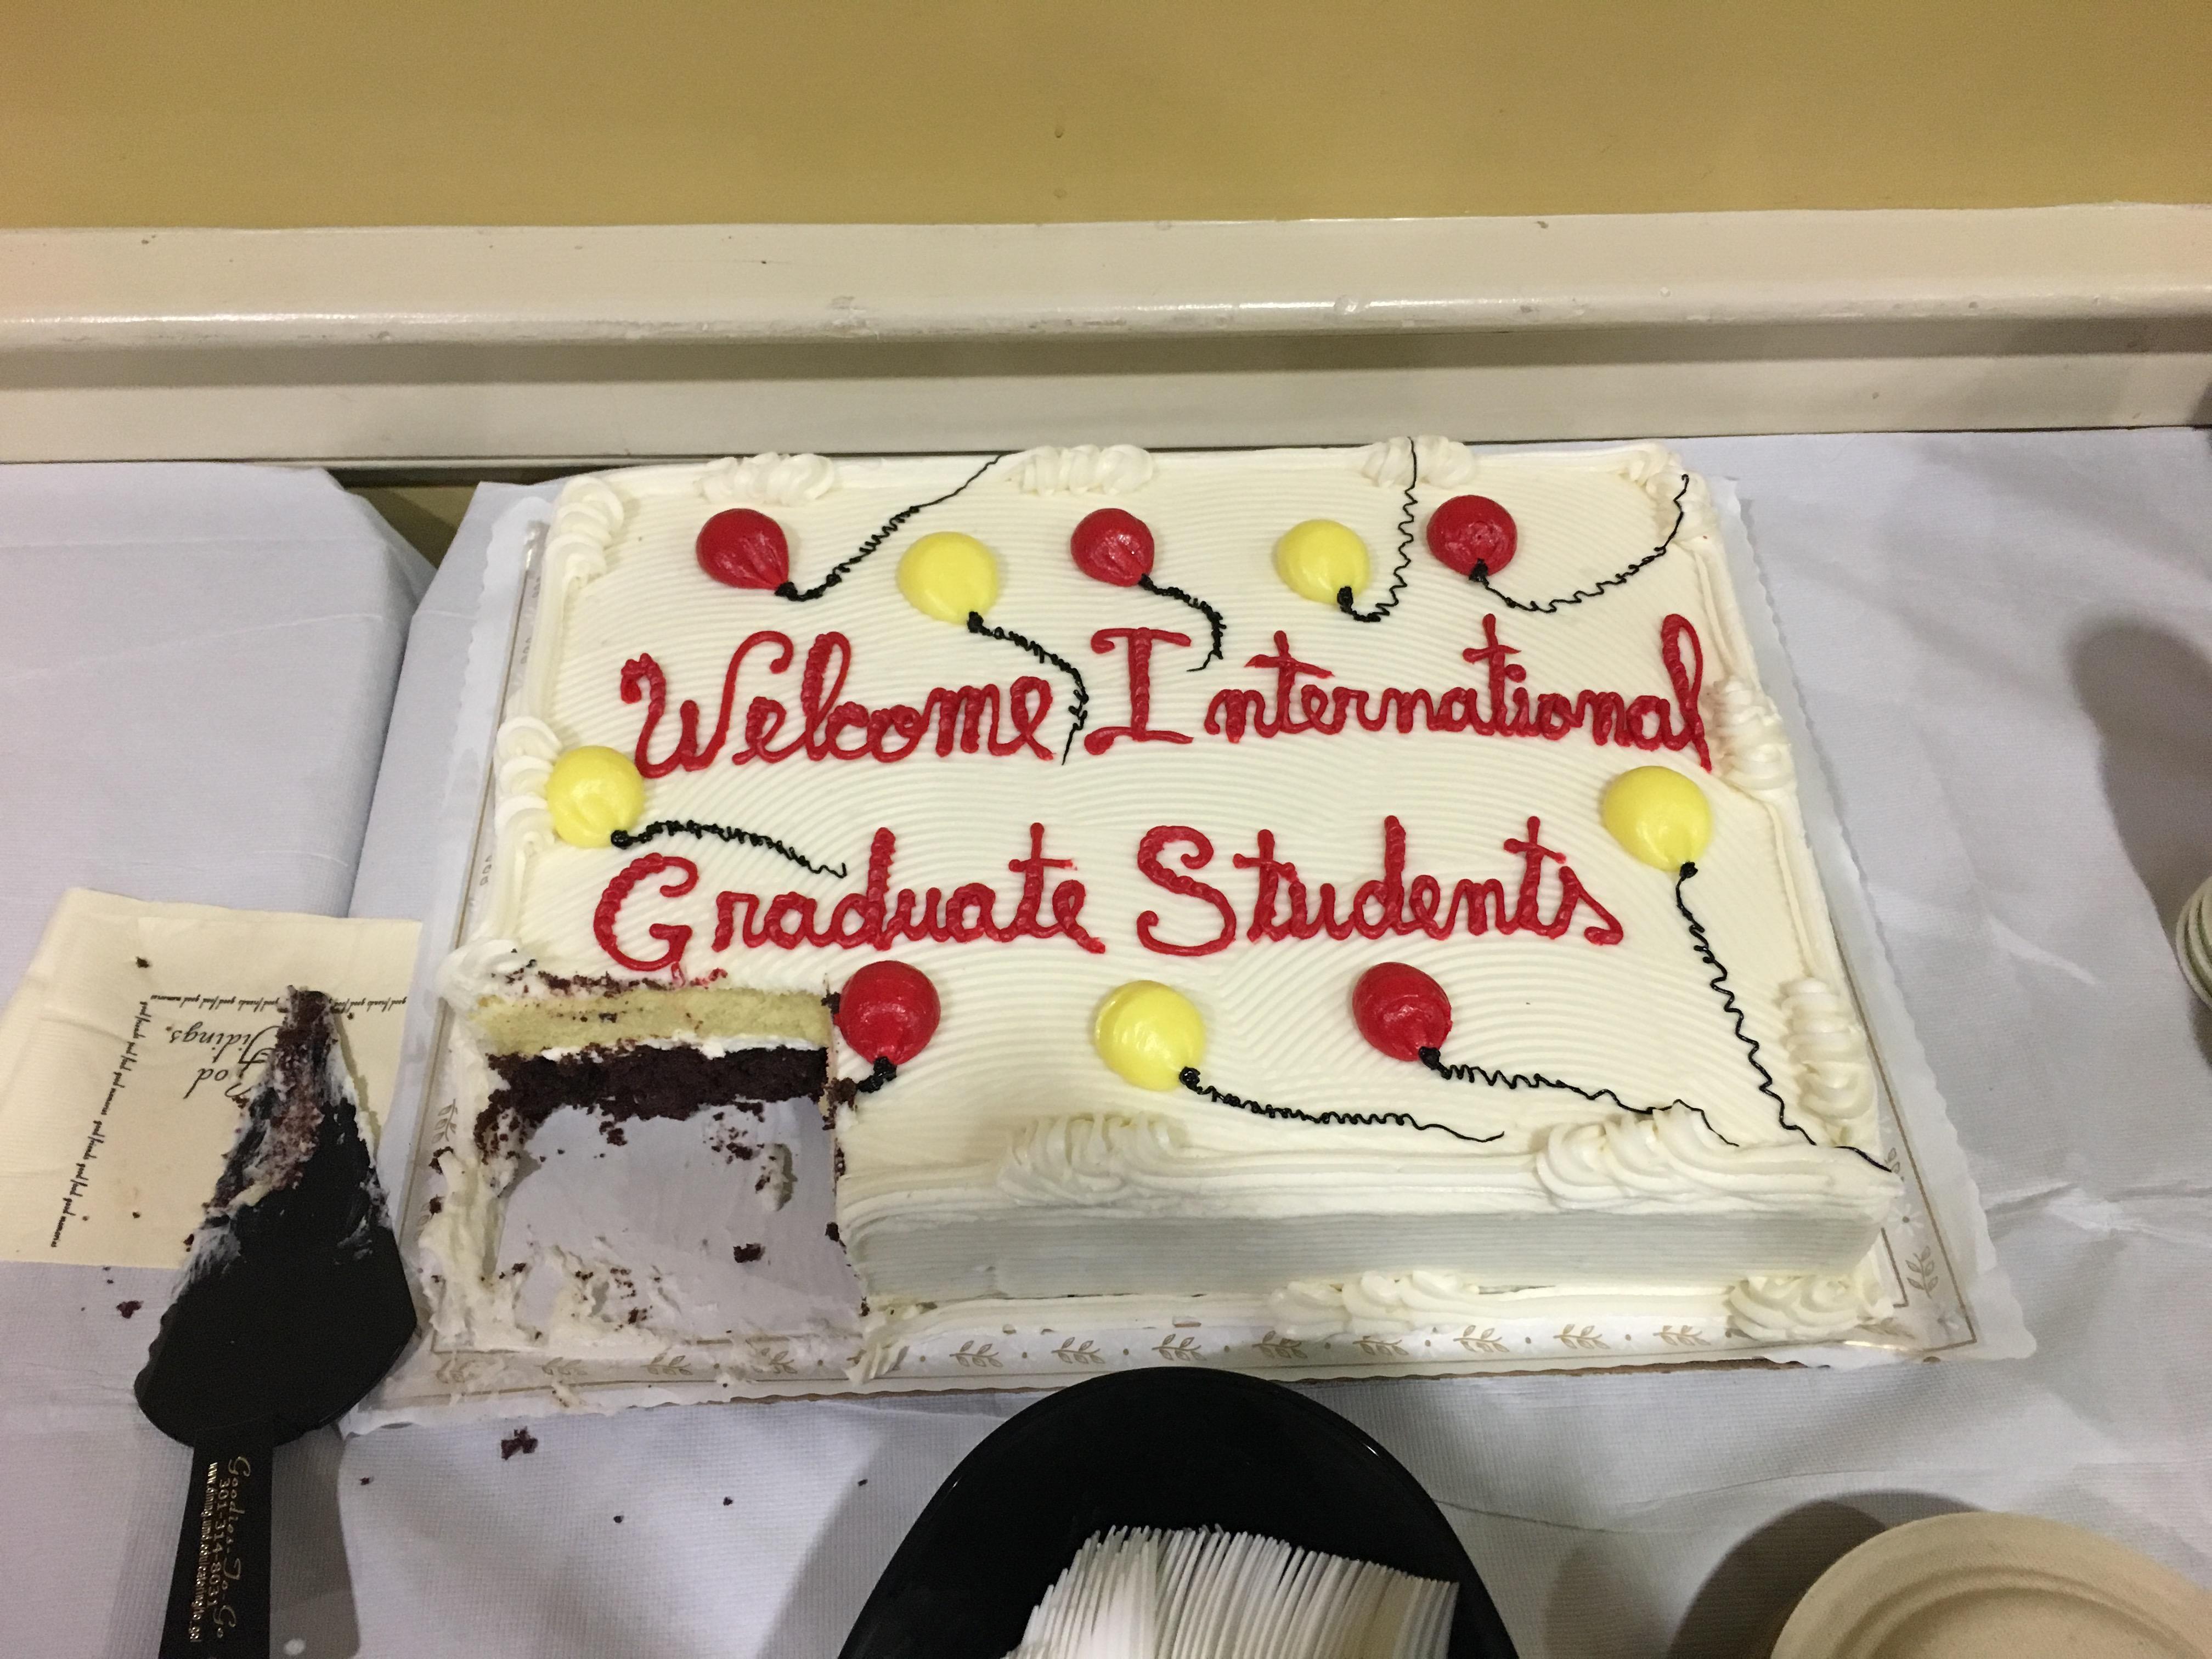 Sheet caked decorated with frosting balloons and the words "Welcome International Graduate Students"